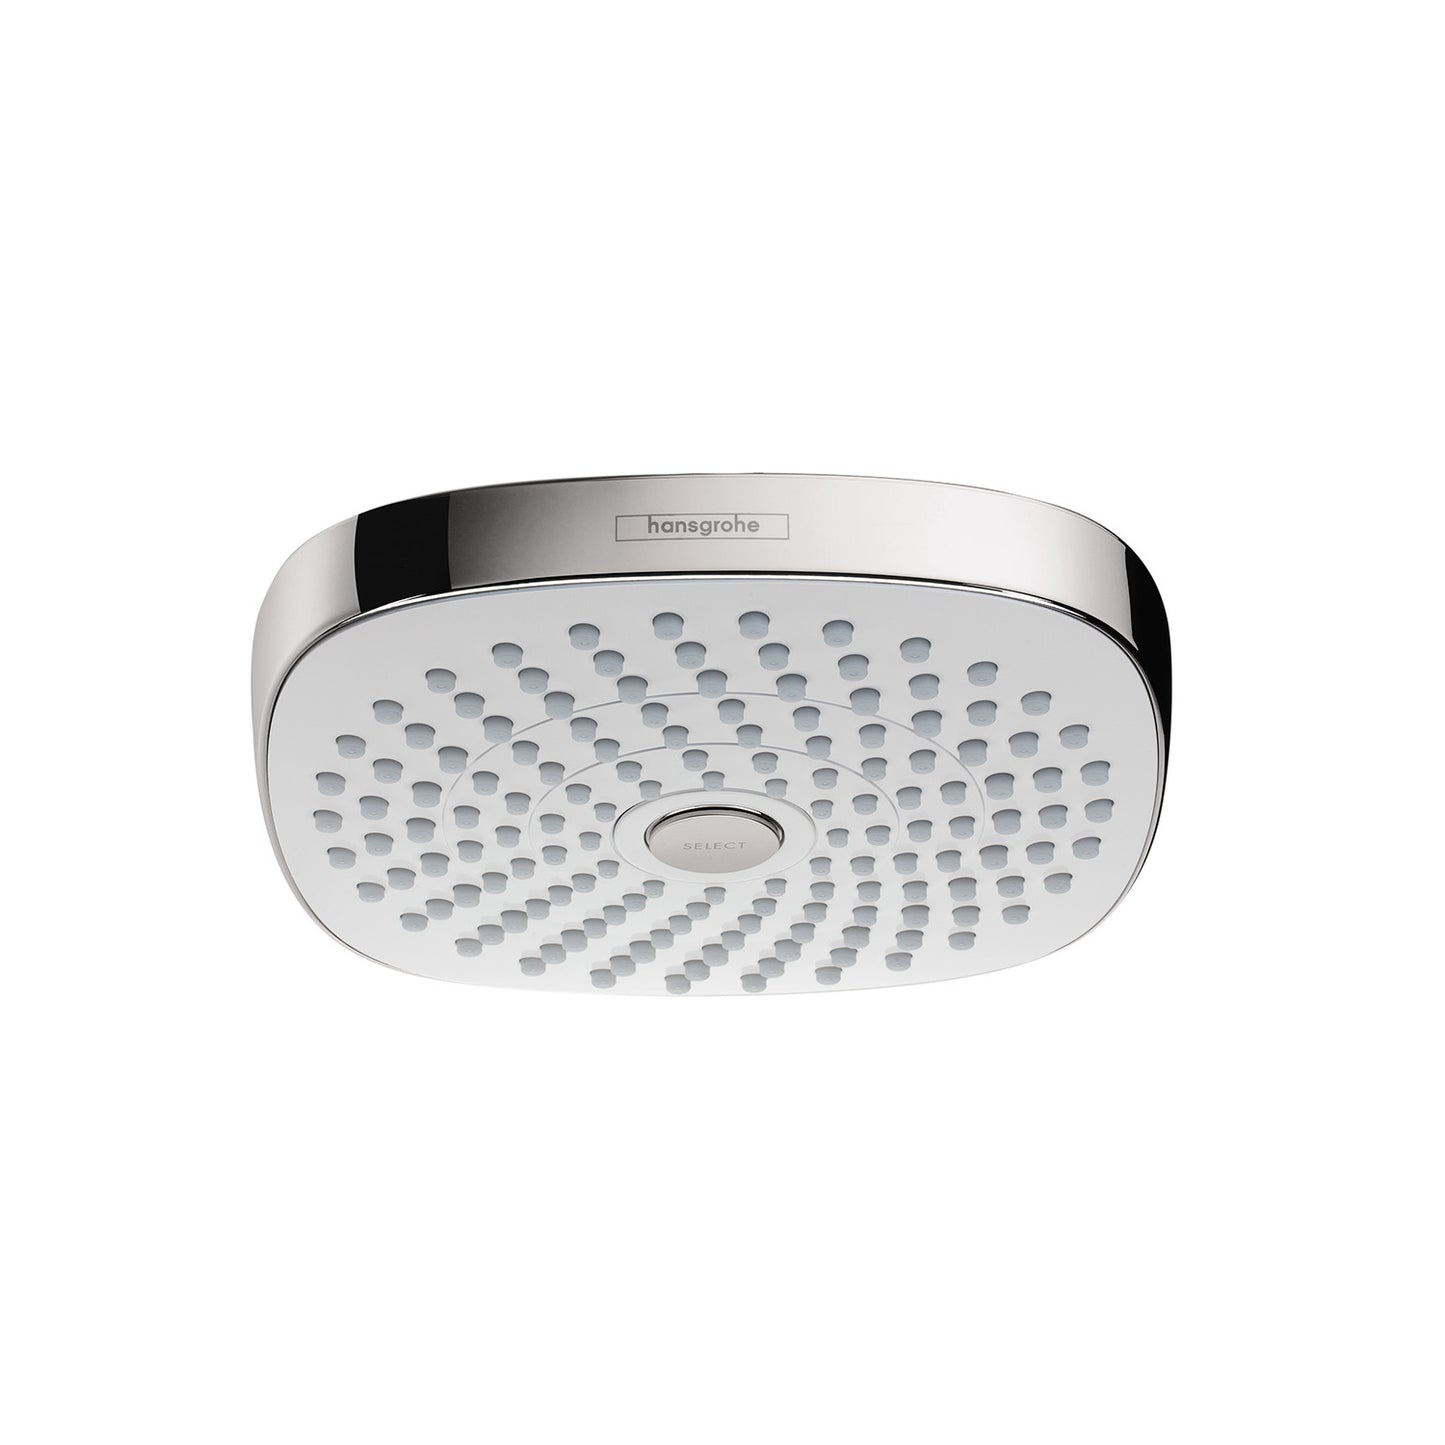 HANSGROHE 26528401 Croma Select E Showerhead 180 2-Jet, 2.0 GPM in White/Chrome